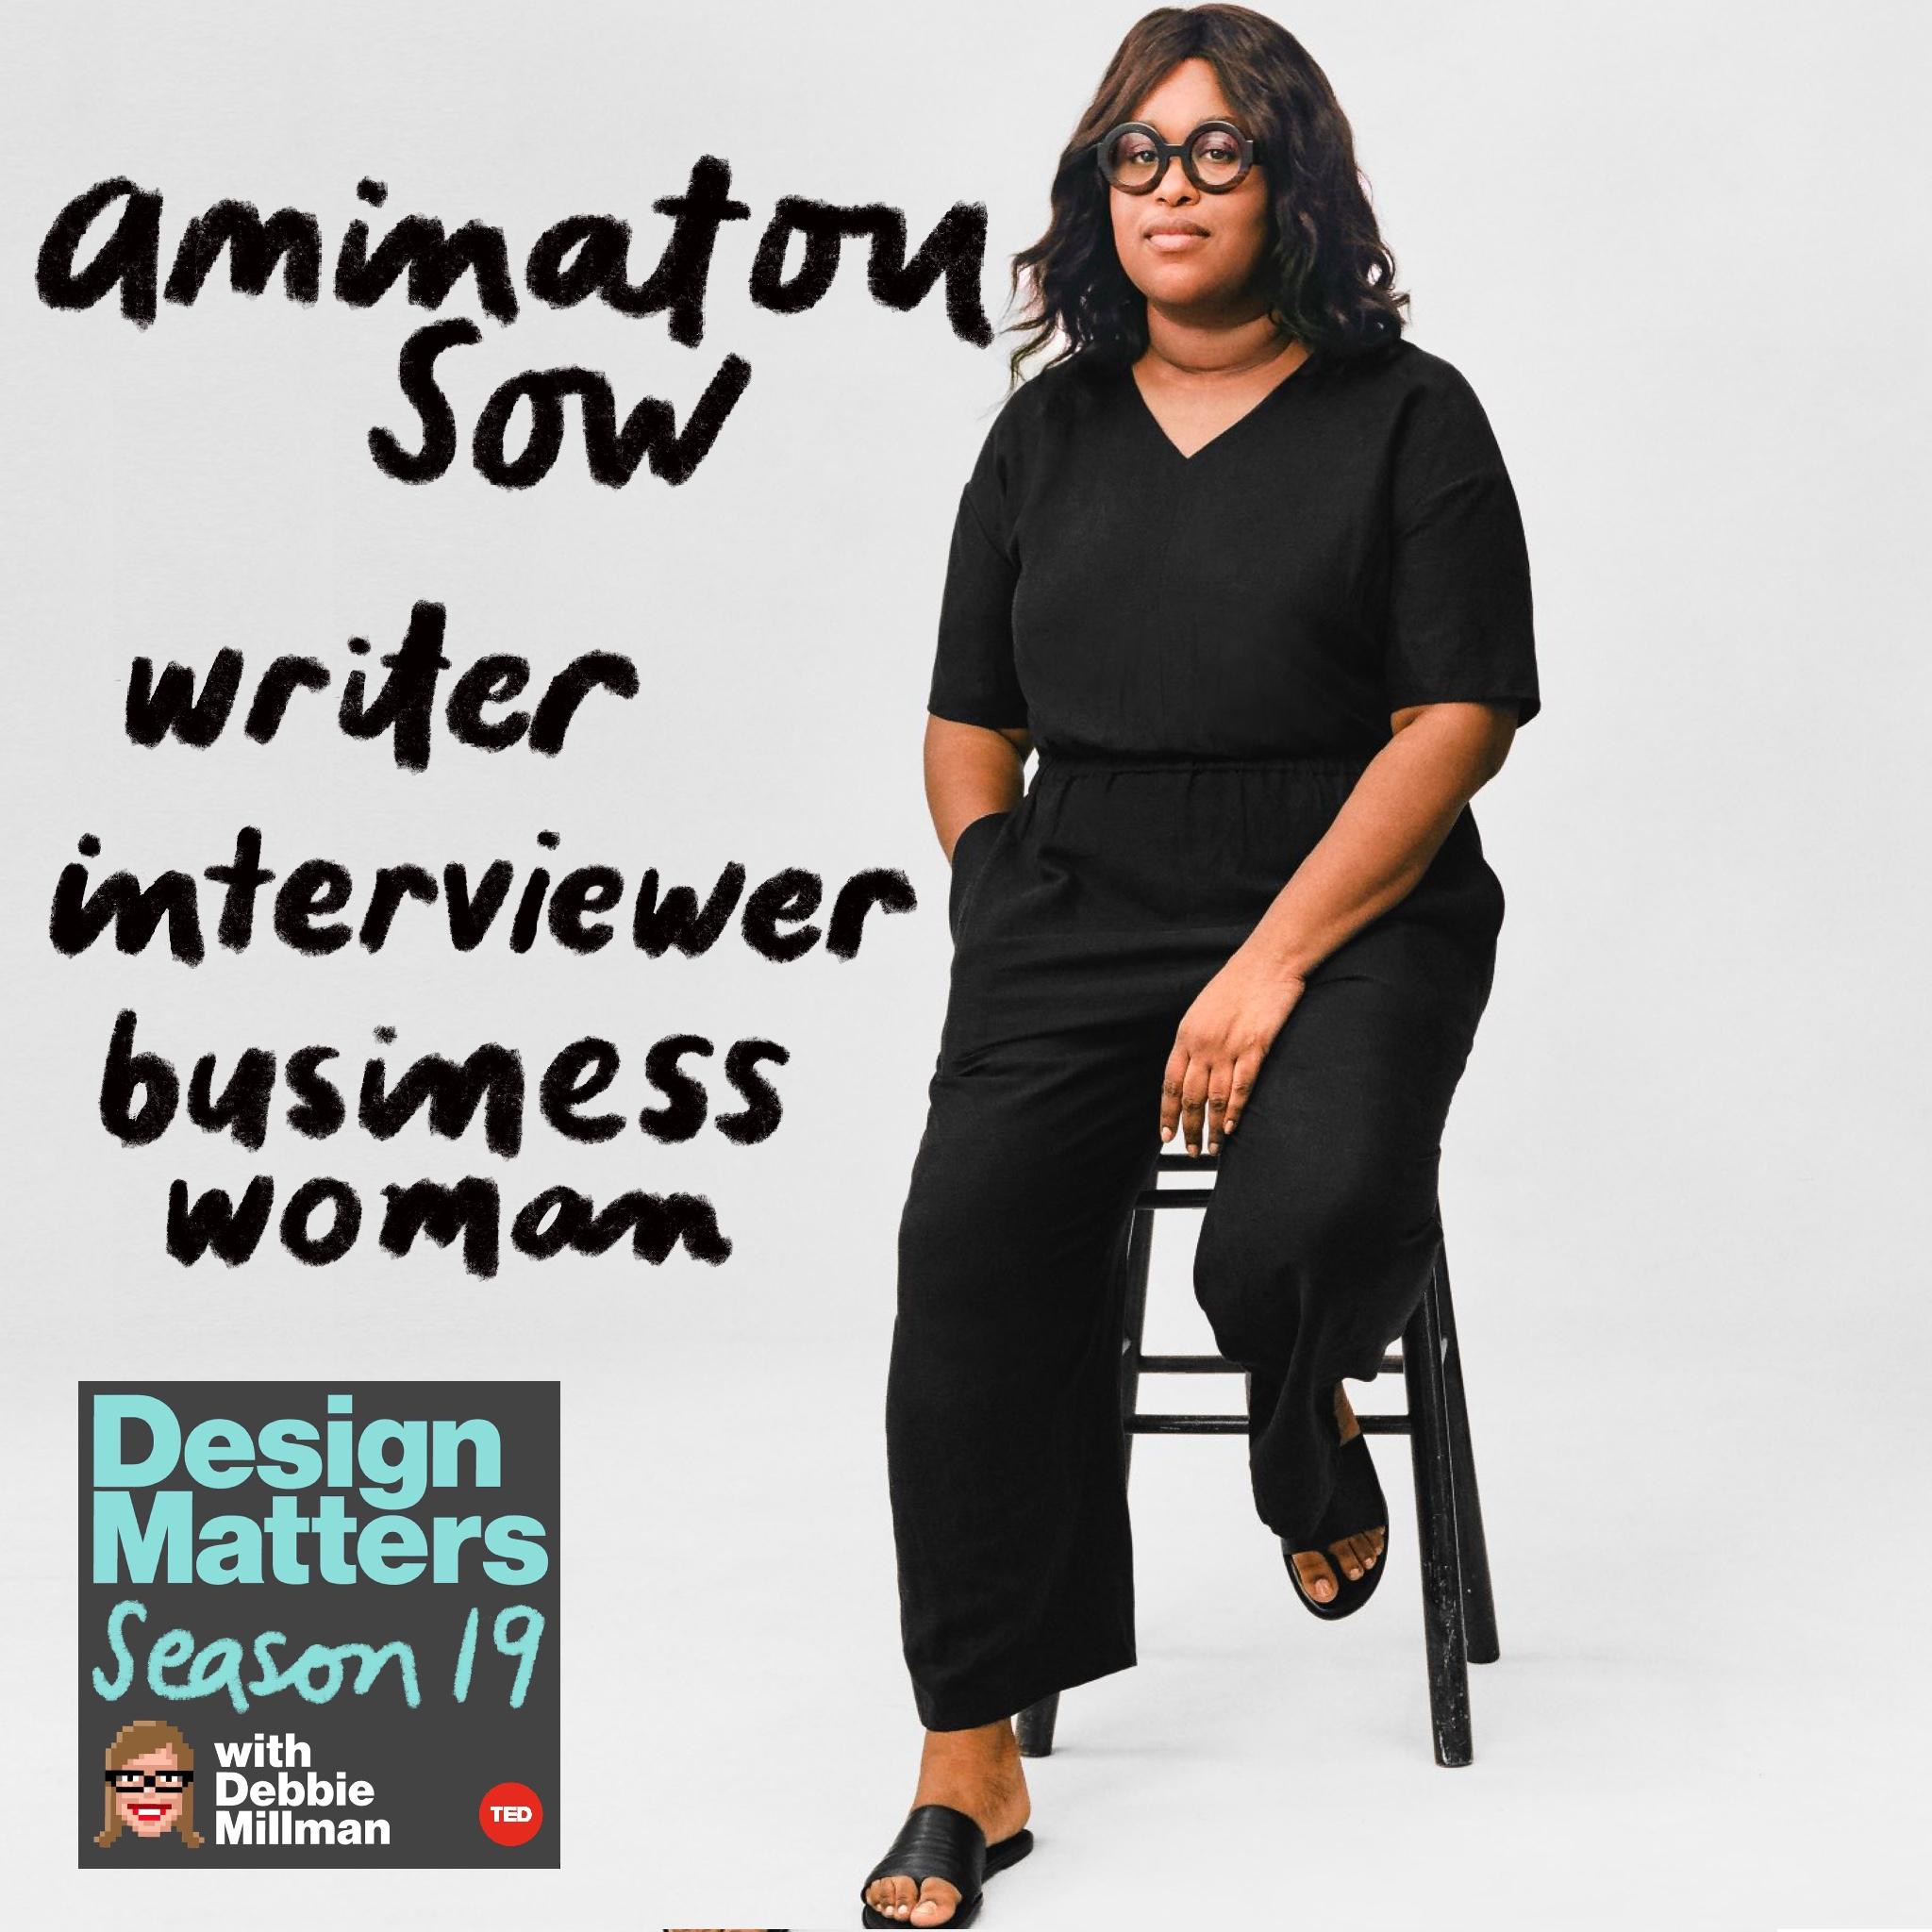 Thumbnail for "Best of Design Matters: Aminatou Sow".